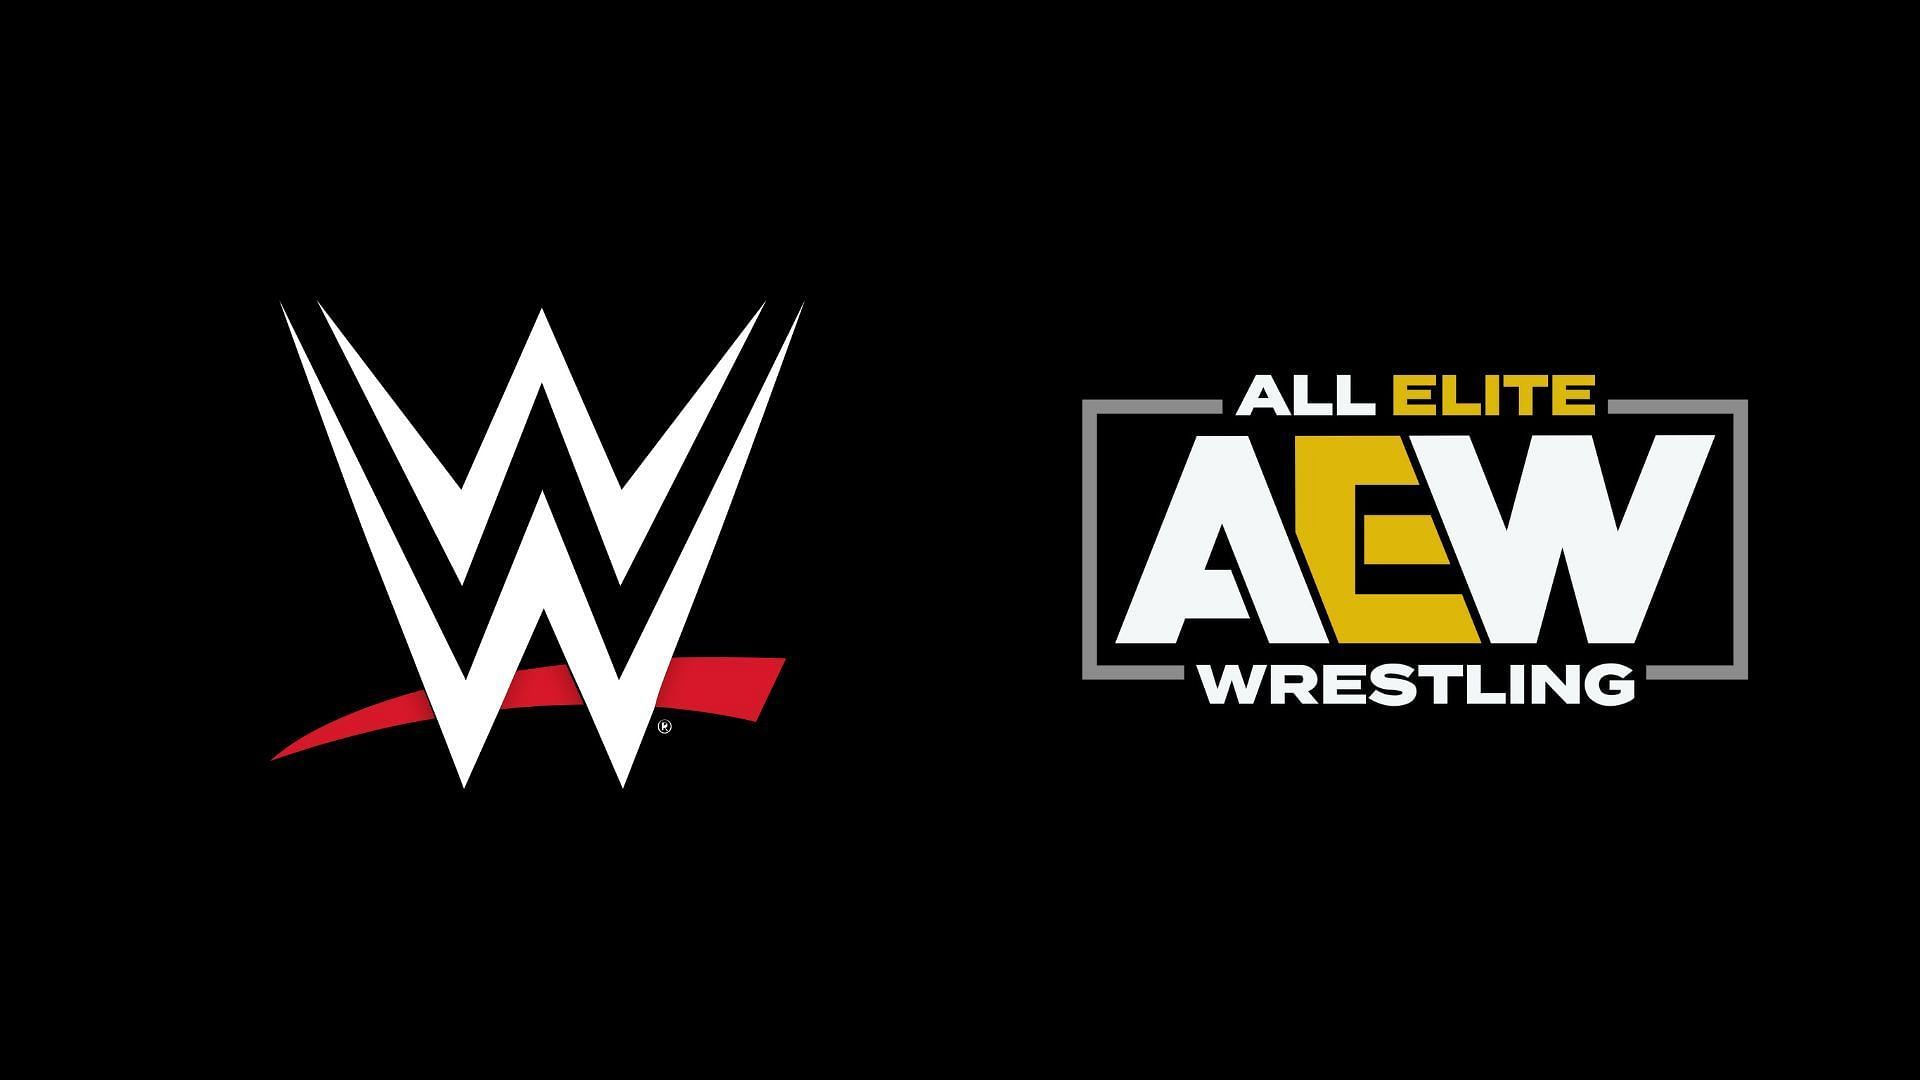 WWE and AEW recently went face to face.